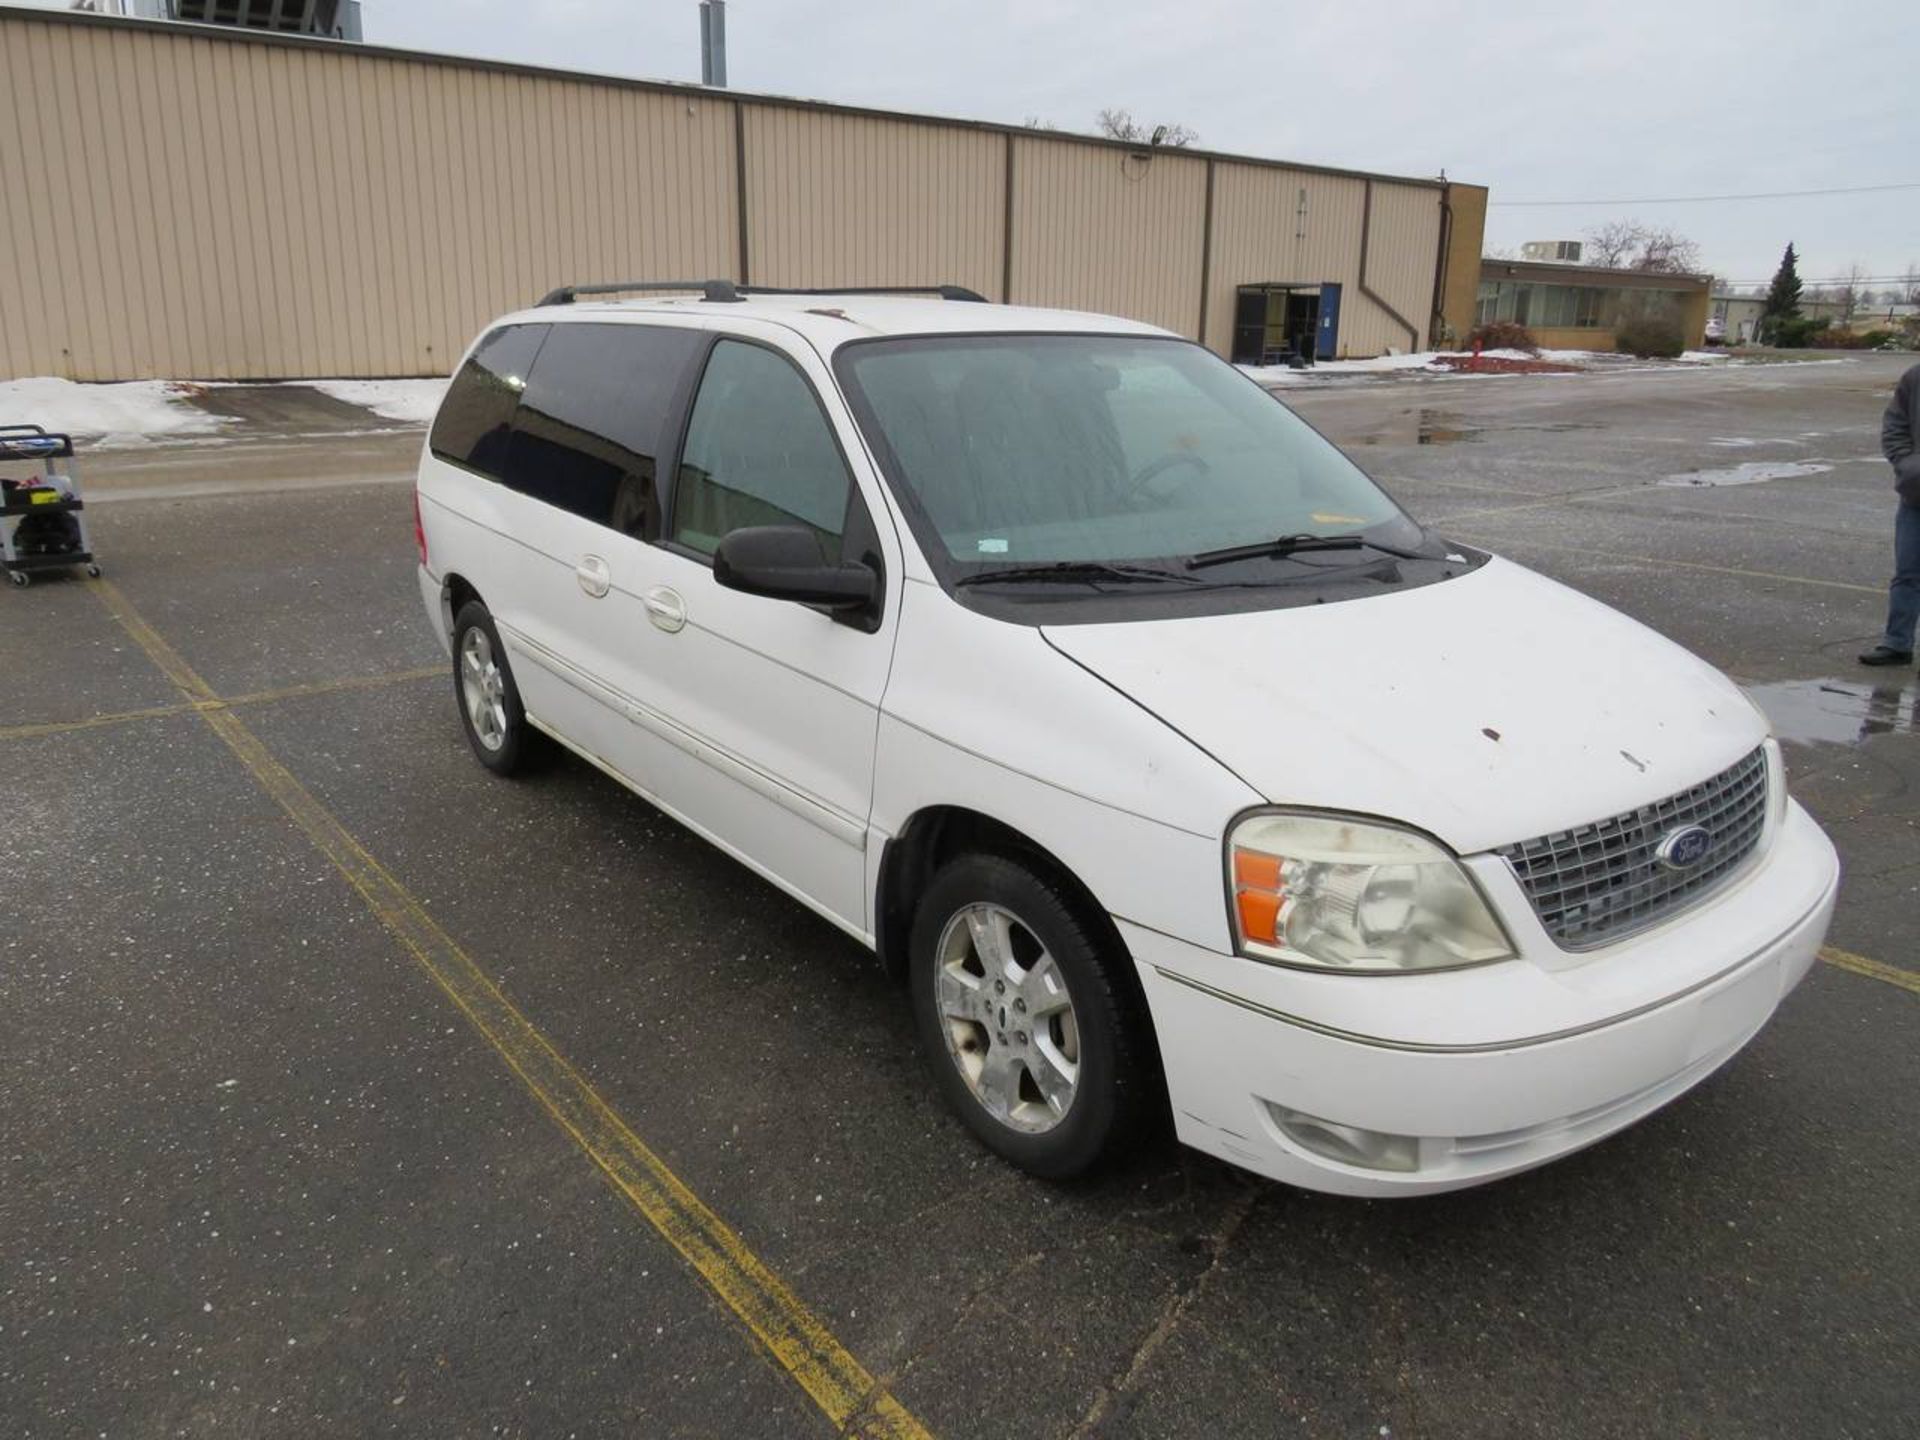 2005 Ford Freestyle Van - Image 12 of 23